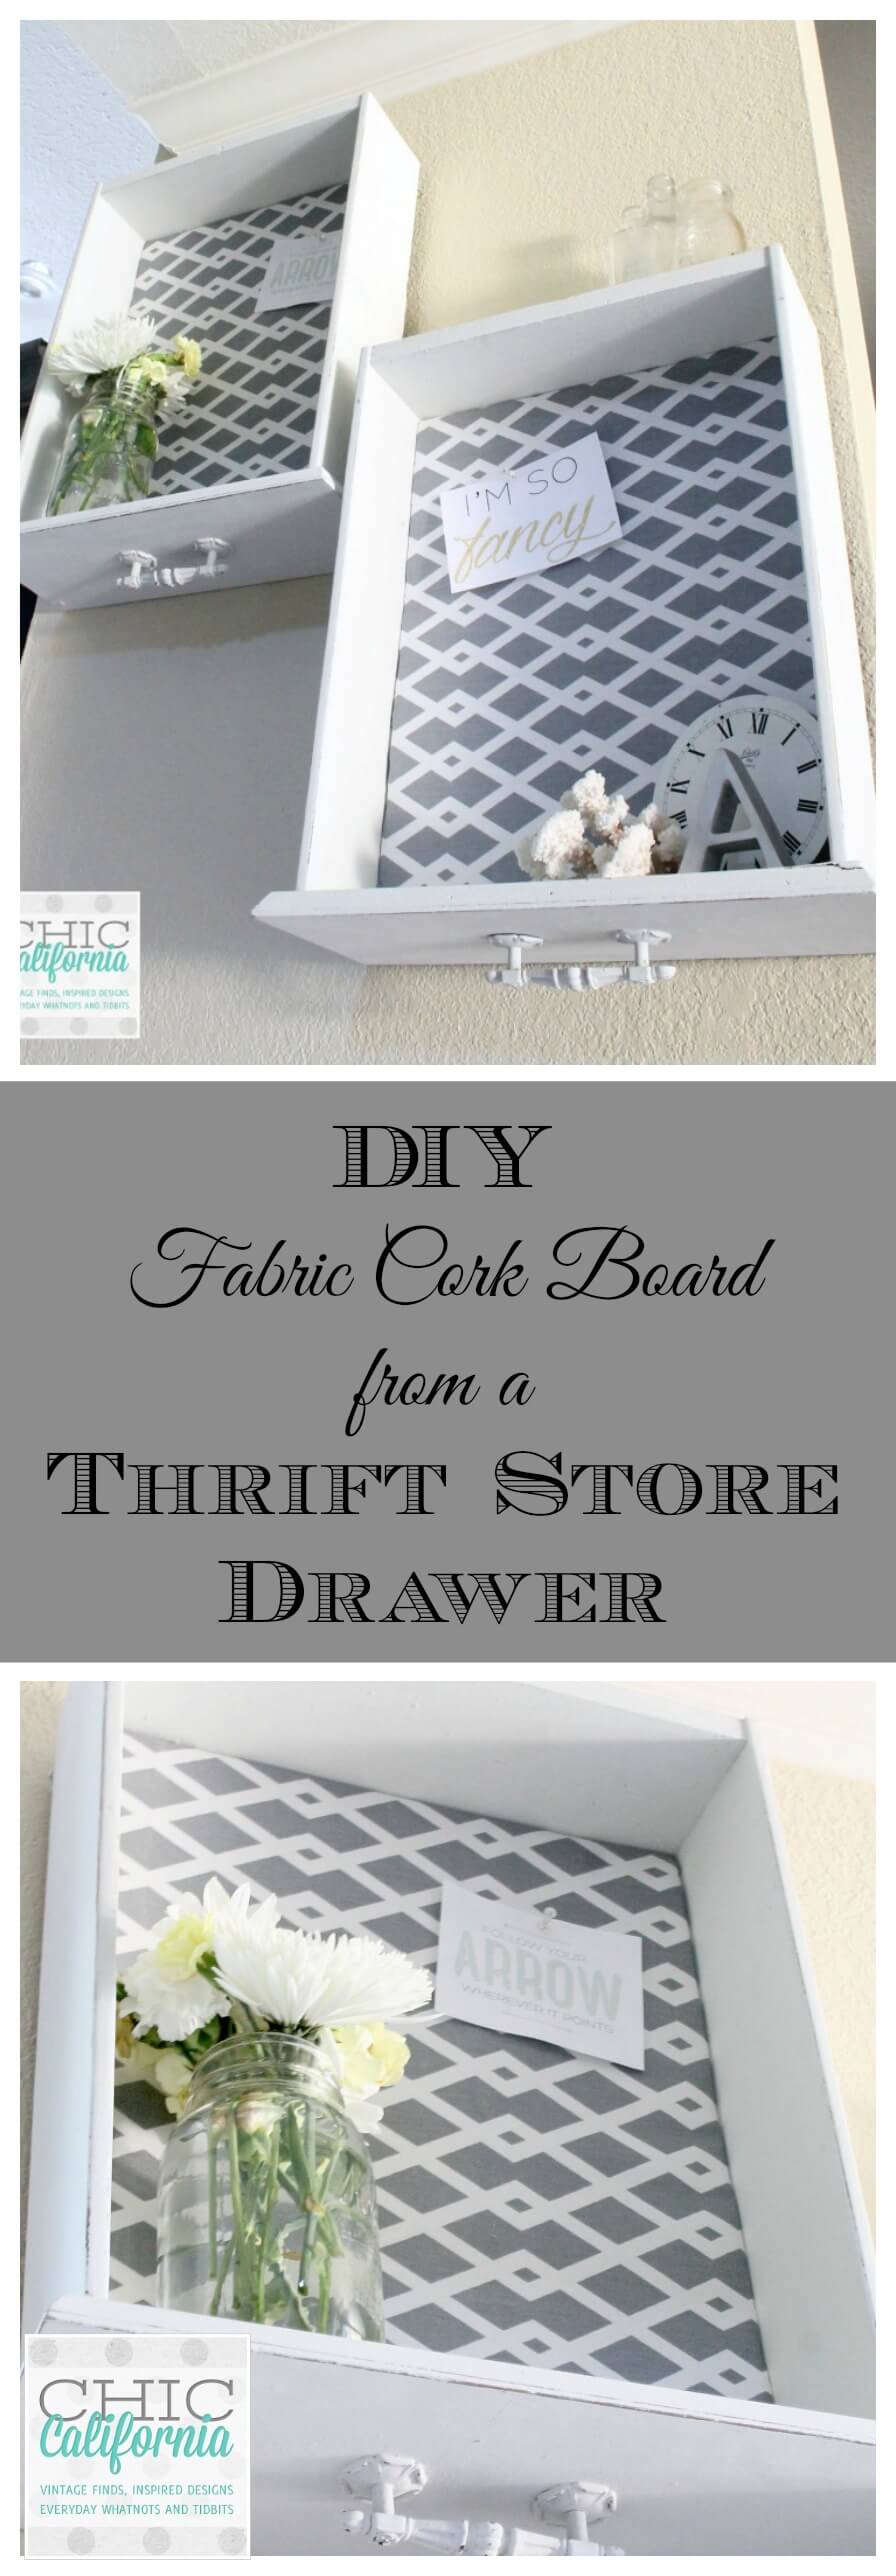 Recycled Old Drawer Ideas for the Bathroom